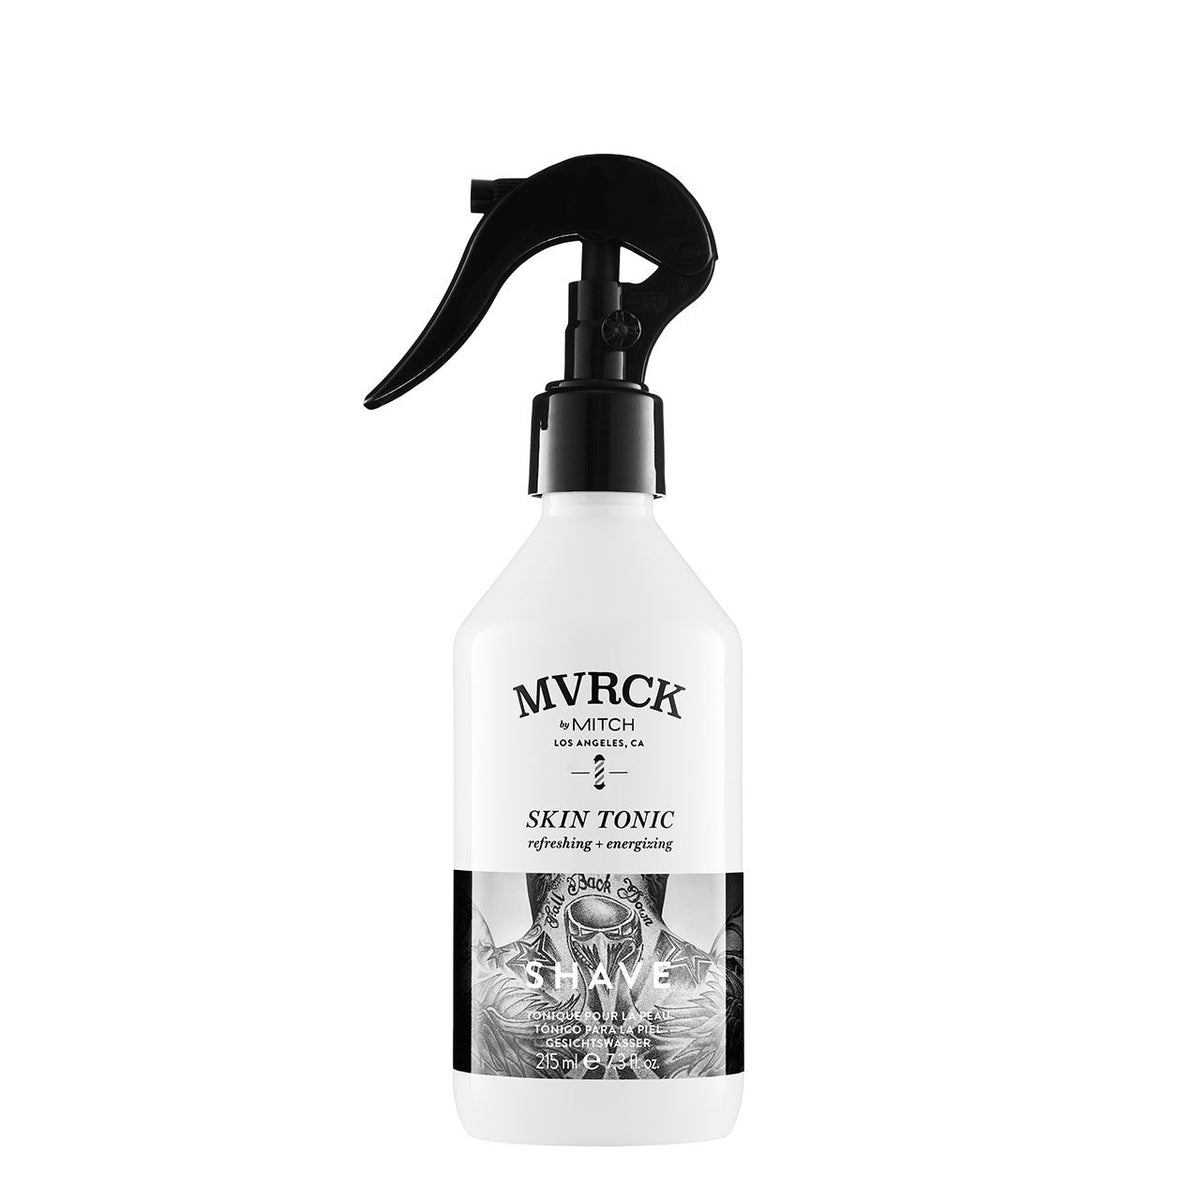 Mvrck Skin Tonic - 215ML - by Paul Mitchell |ProCare Outlet|